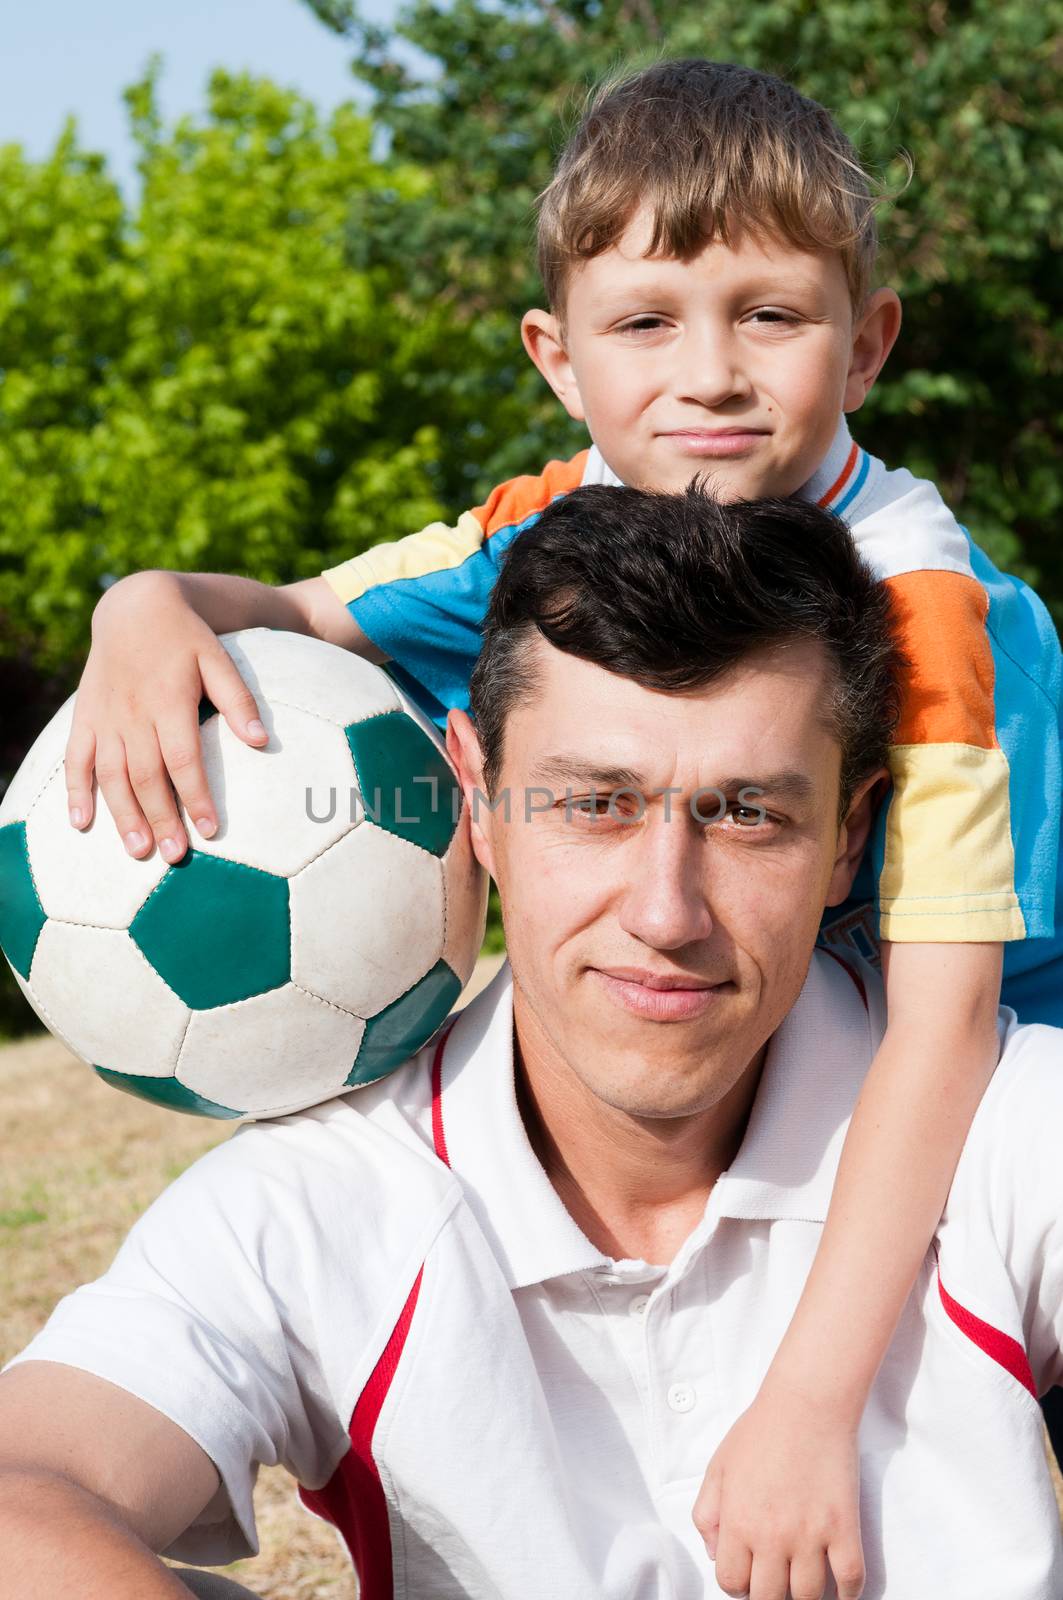 Father and son came to the park to play football and take a picture